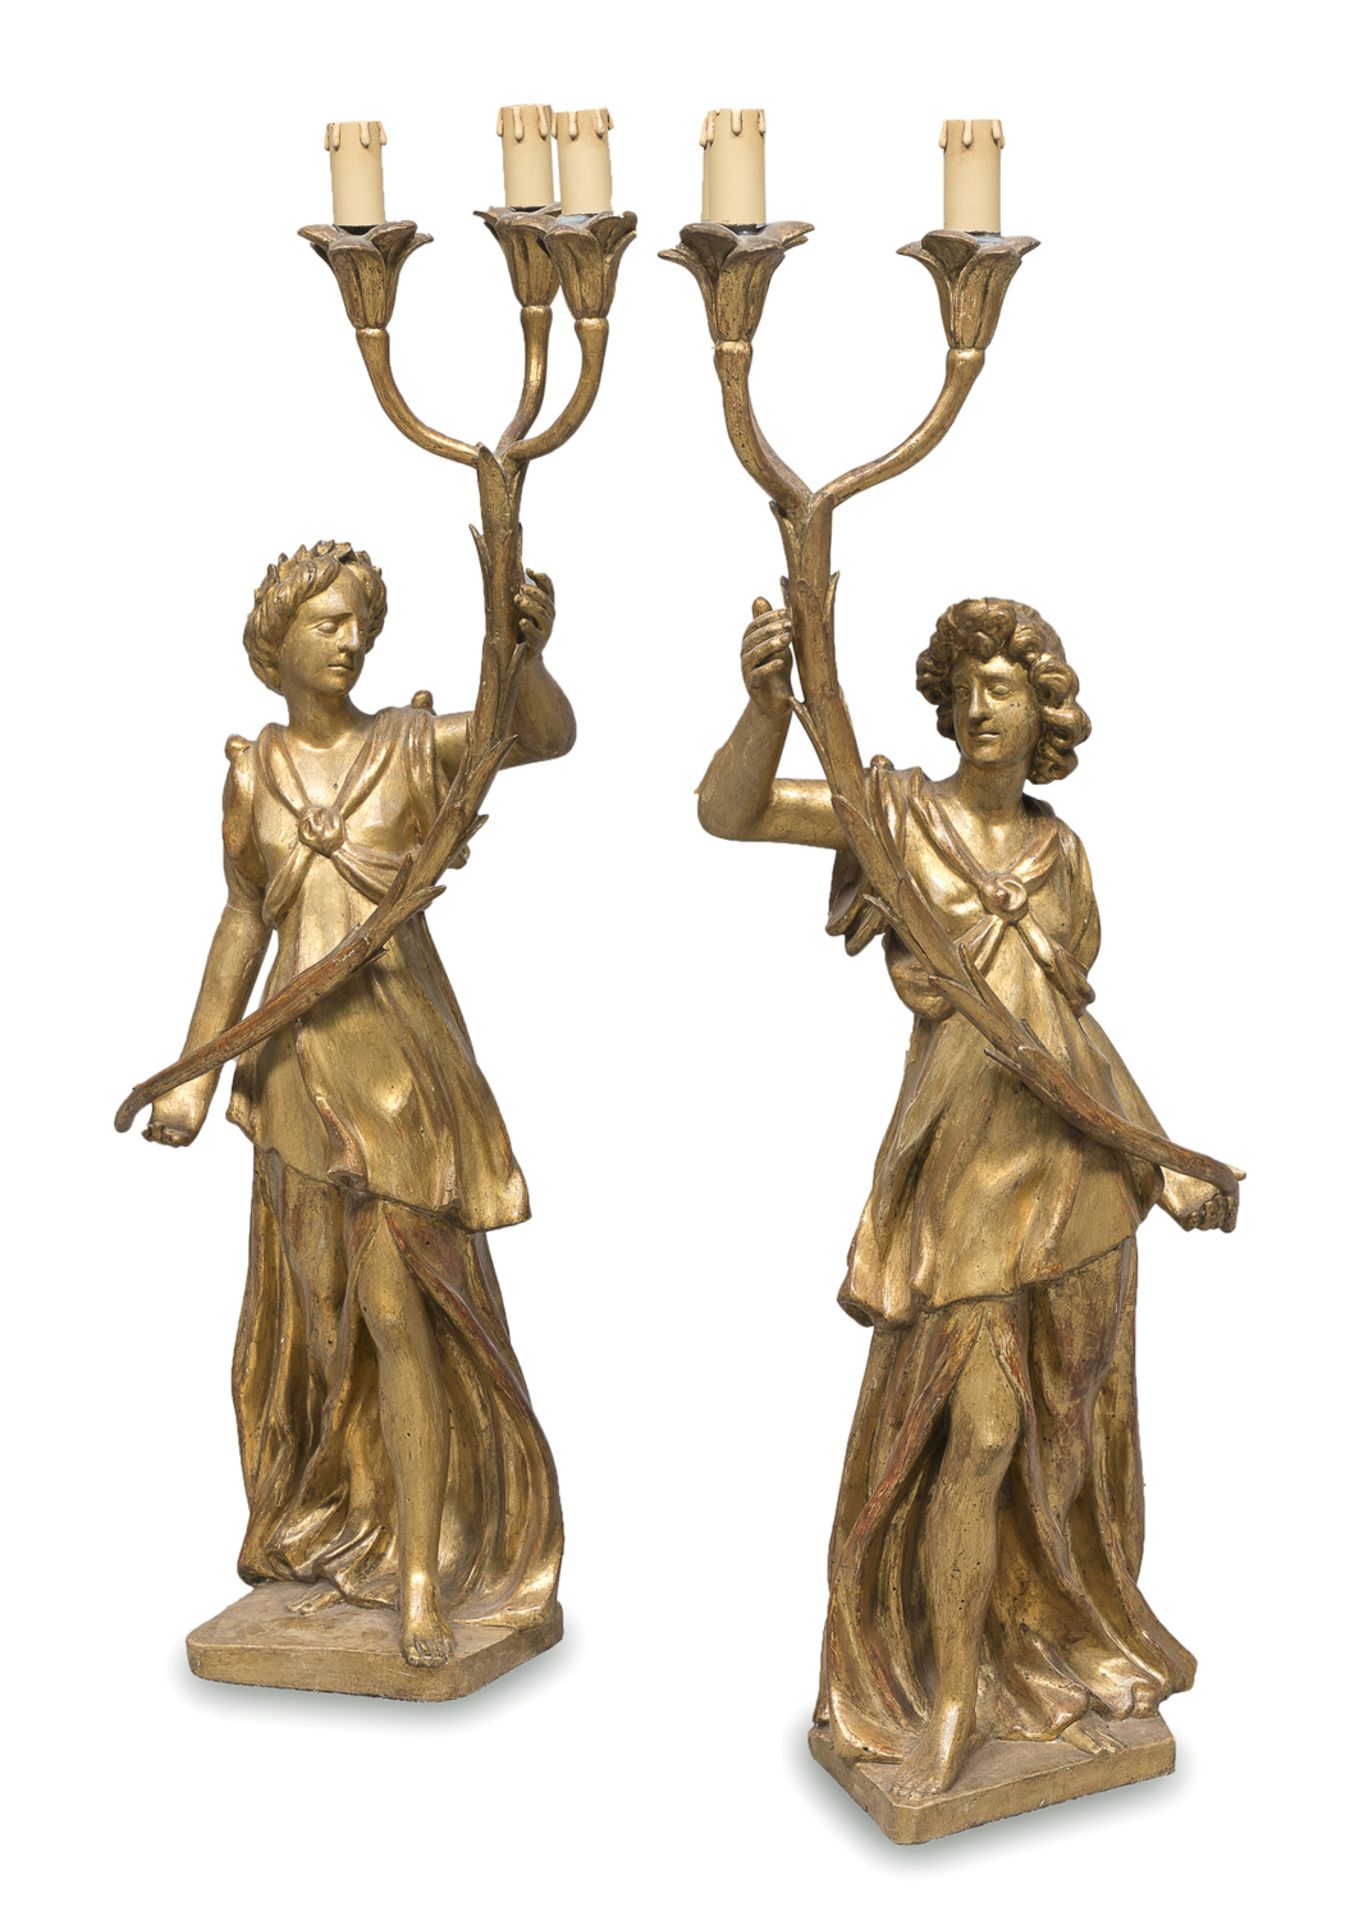 PAIR OF GILTWOOD TORCH HOLDER SCULPTURES NORTHERN ITALY 18th CENTURY